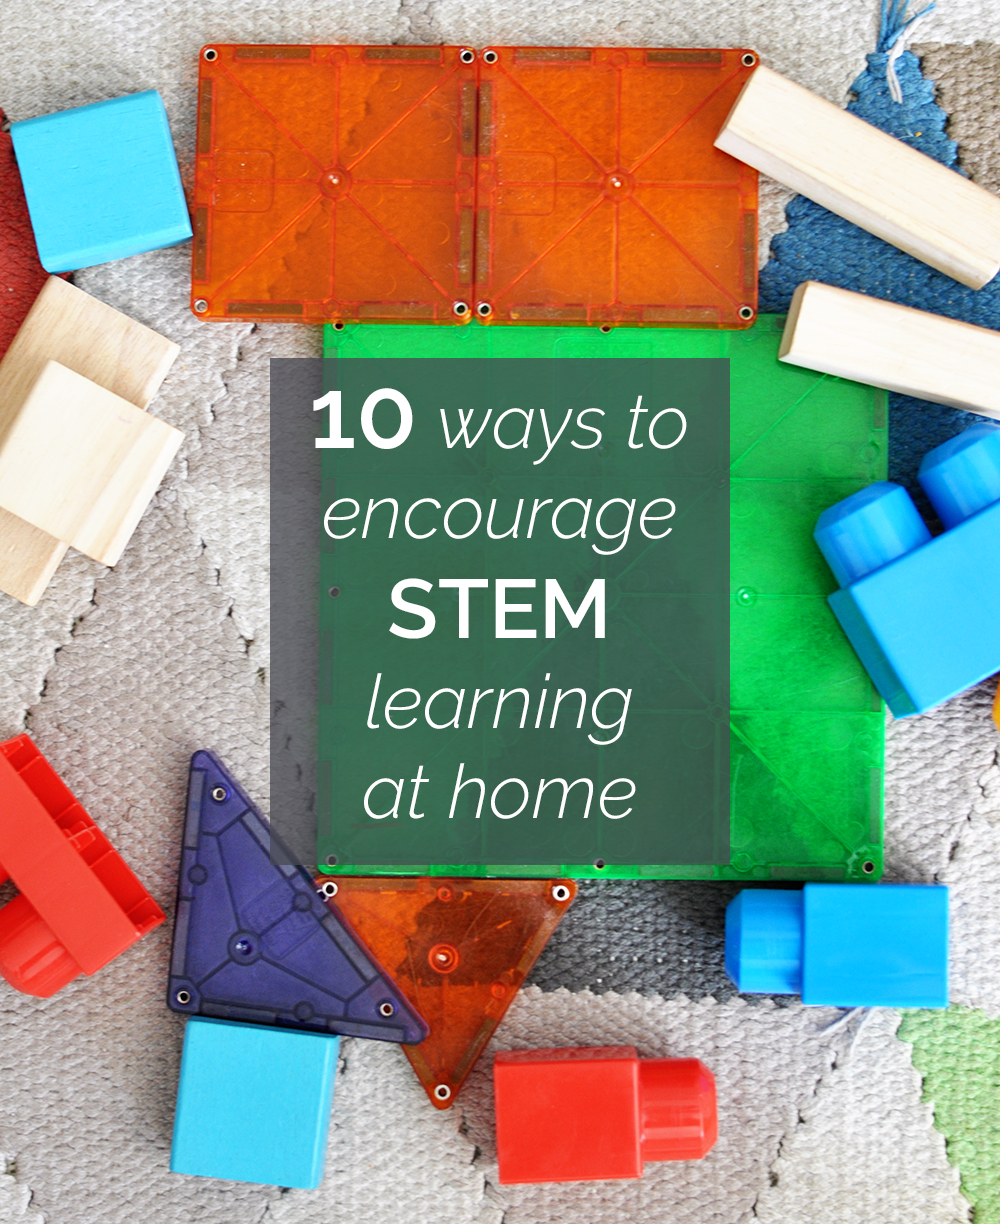 10 Ways We Encourage STEM Learning At Home (And A Snapology LEGO Giveaway! — CLOSED)